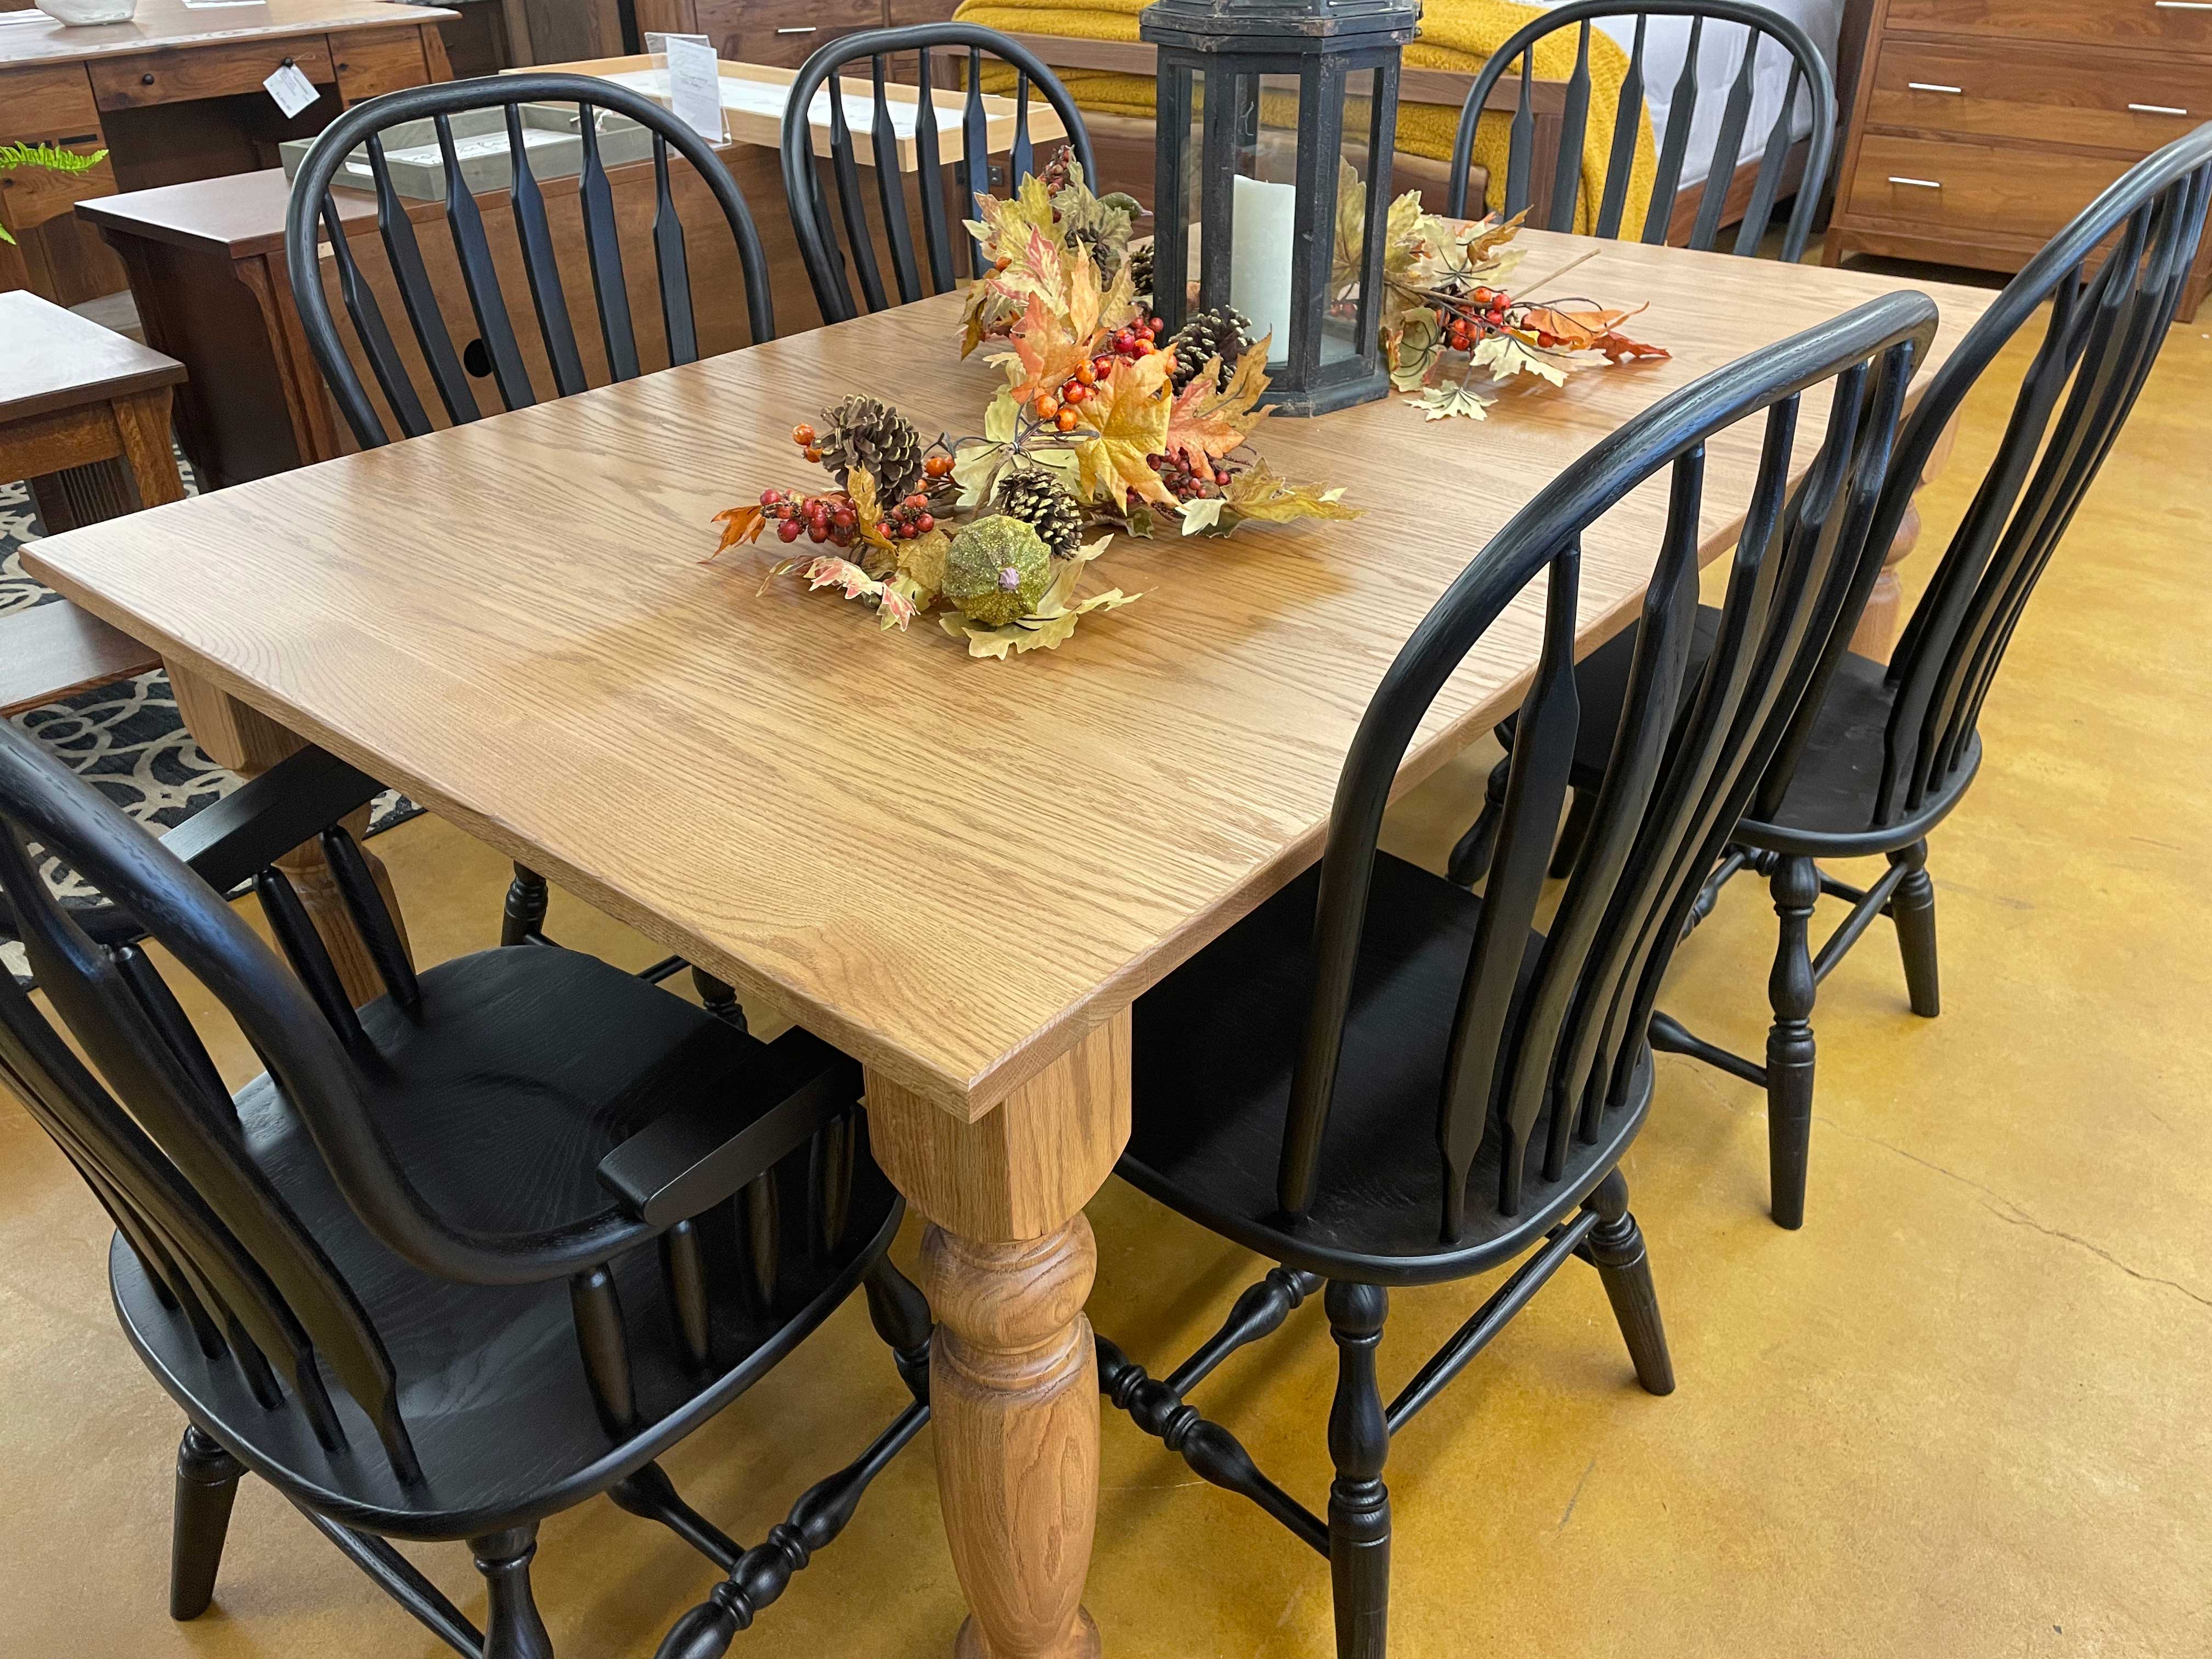 Amish Crafted Furniture set